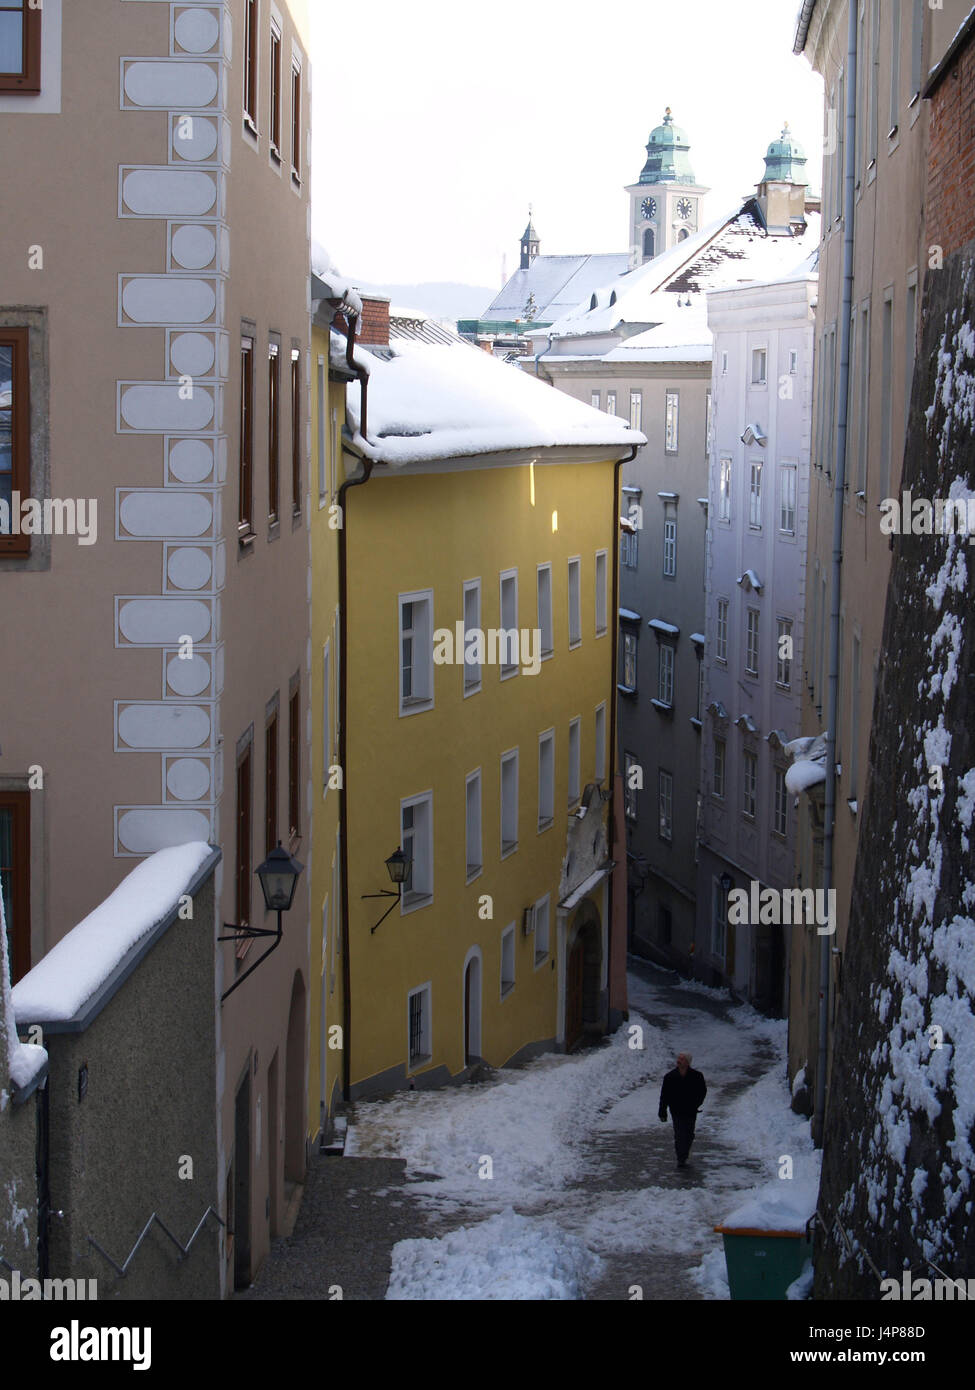 Austria, Upper Austria, Linz, Old Town, lane, winter, snow clearing, lanes, lock, old town centre, town, historically, snow, season, building, architecture, Old Town lane, person, pedestrian, no model release, Stock Photo